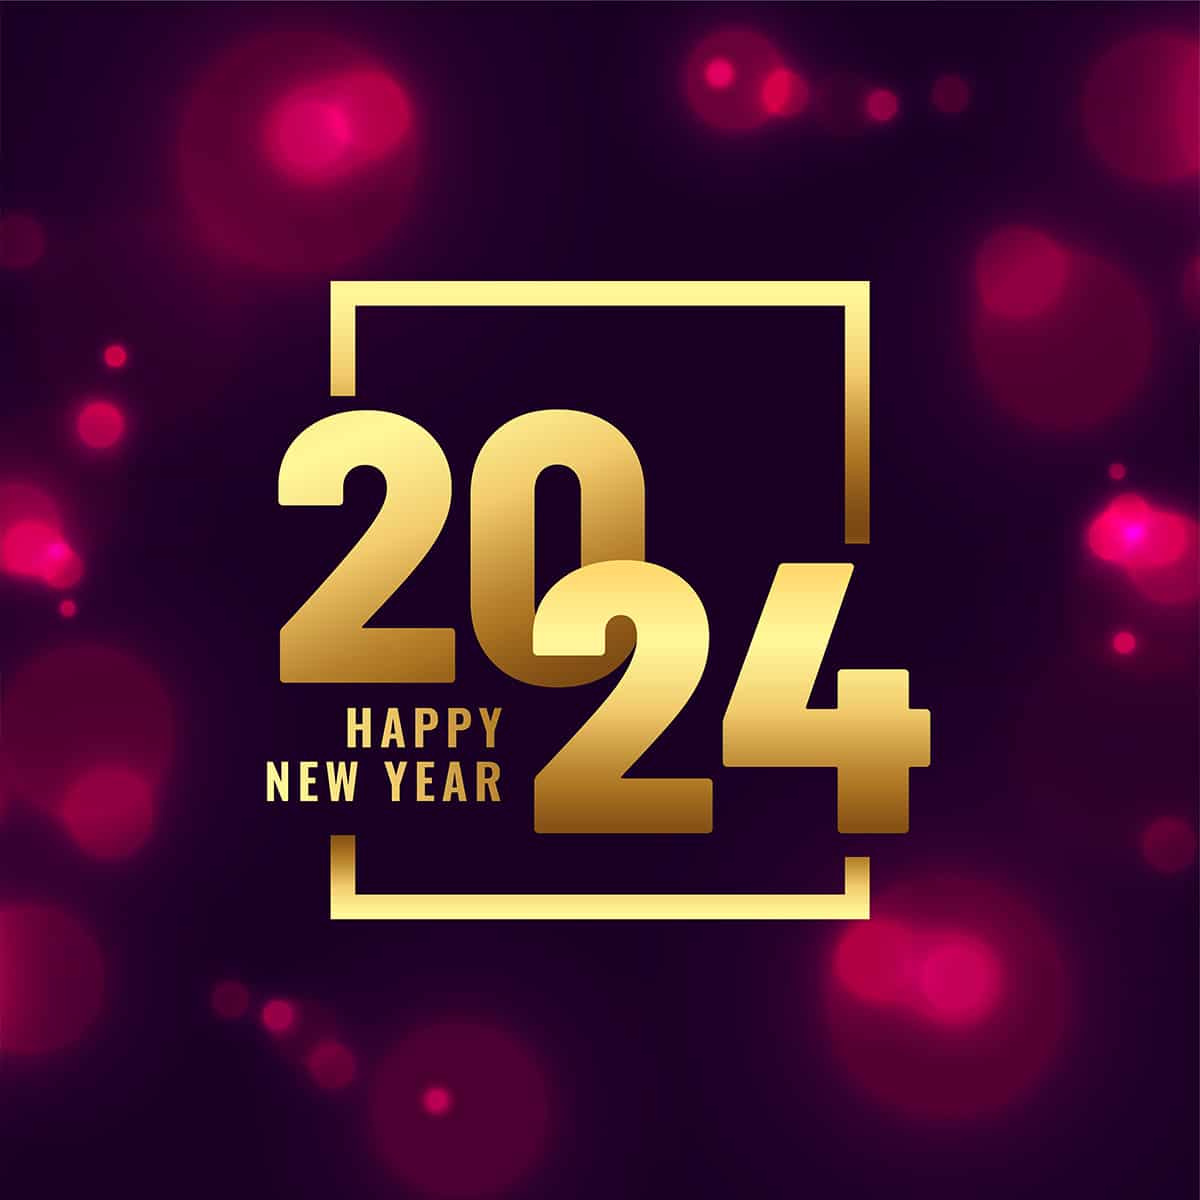 Happy New Year 2024, Happy New year 2024 wishes, Happy New Year 2024 Wishes in Hindi